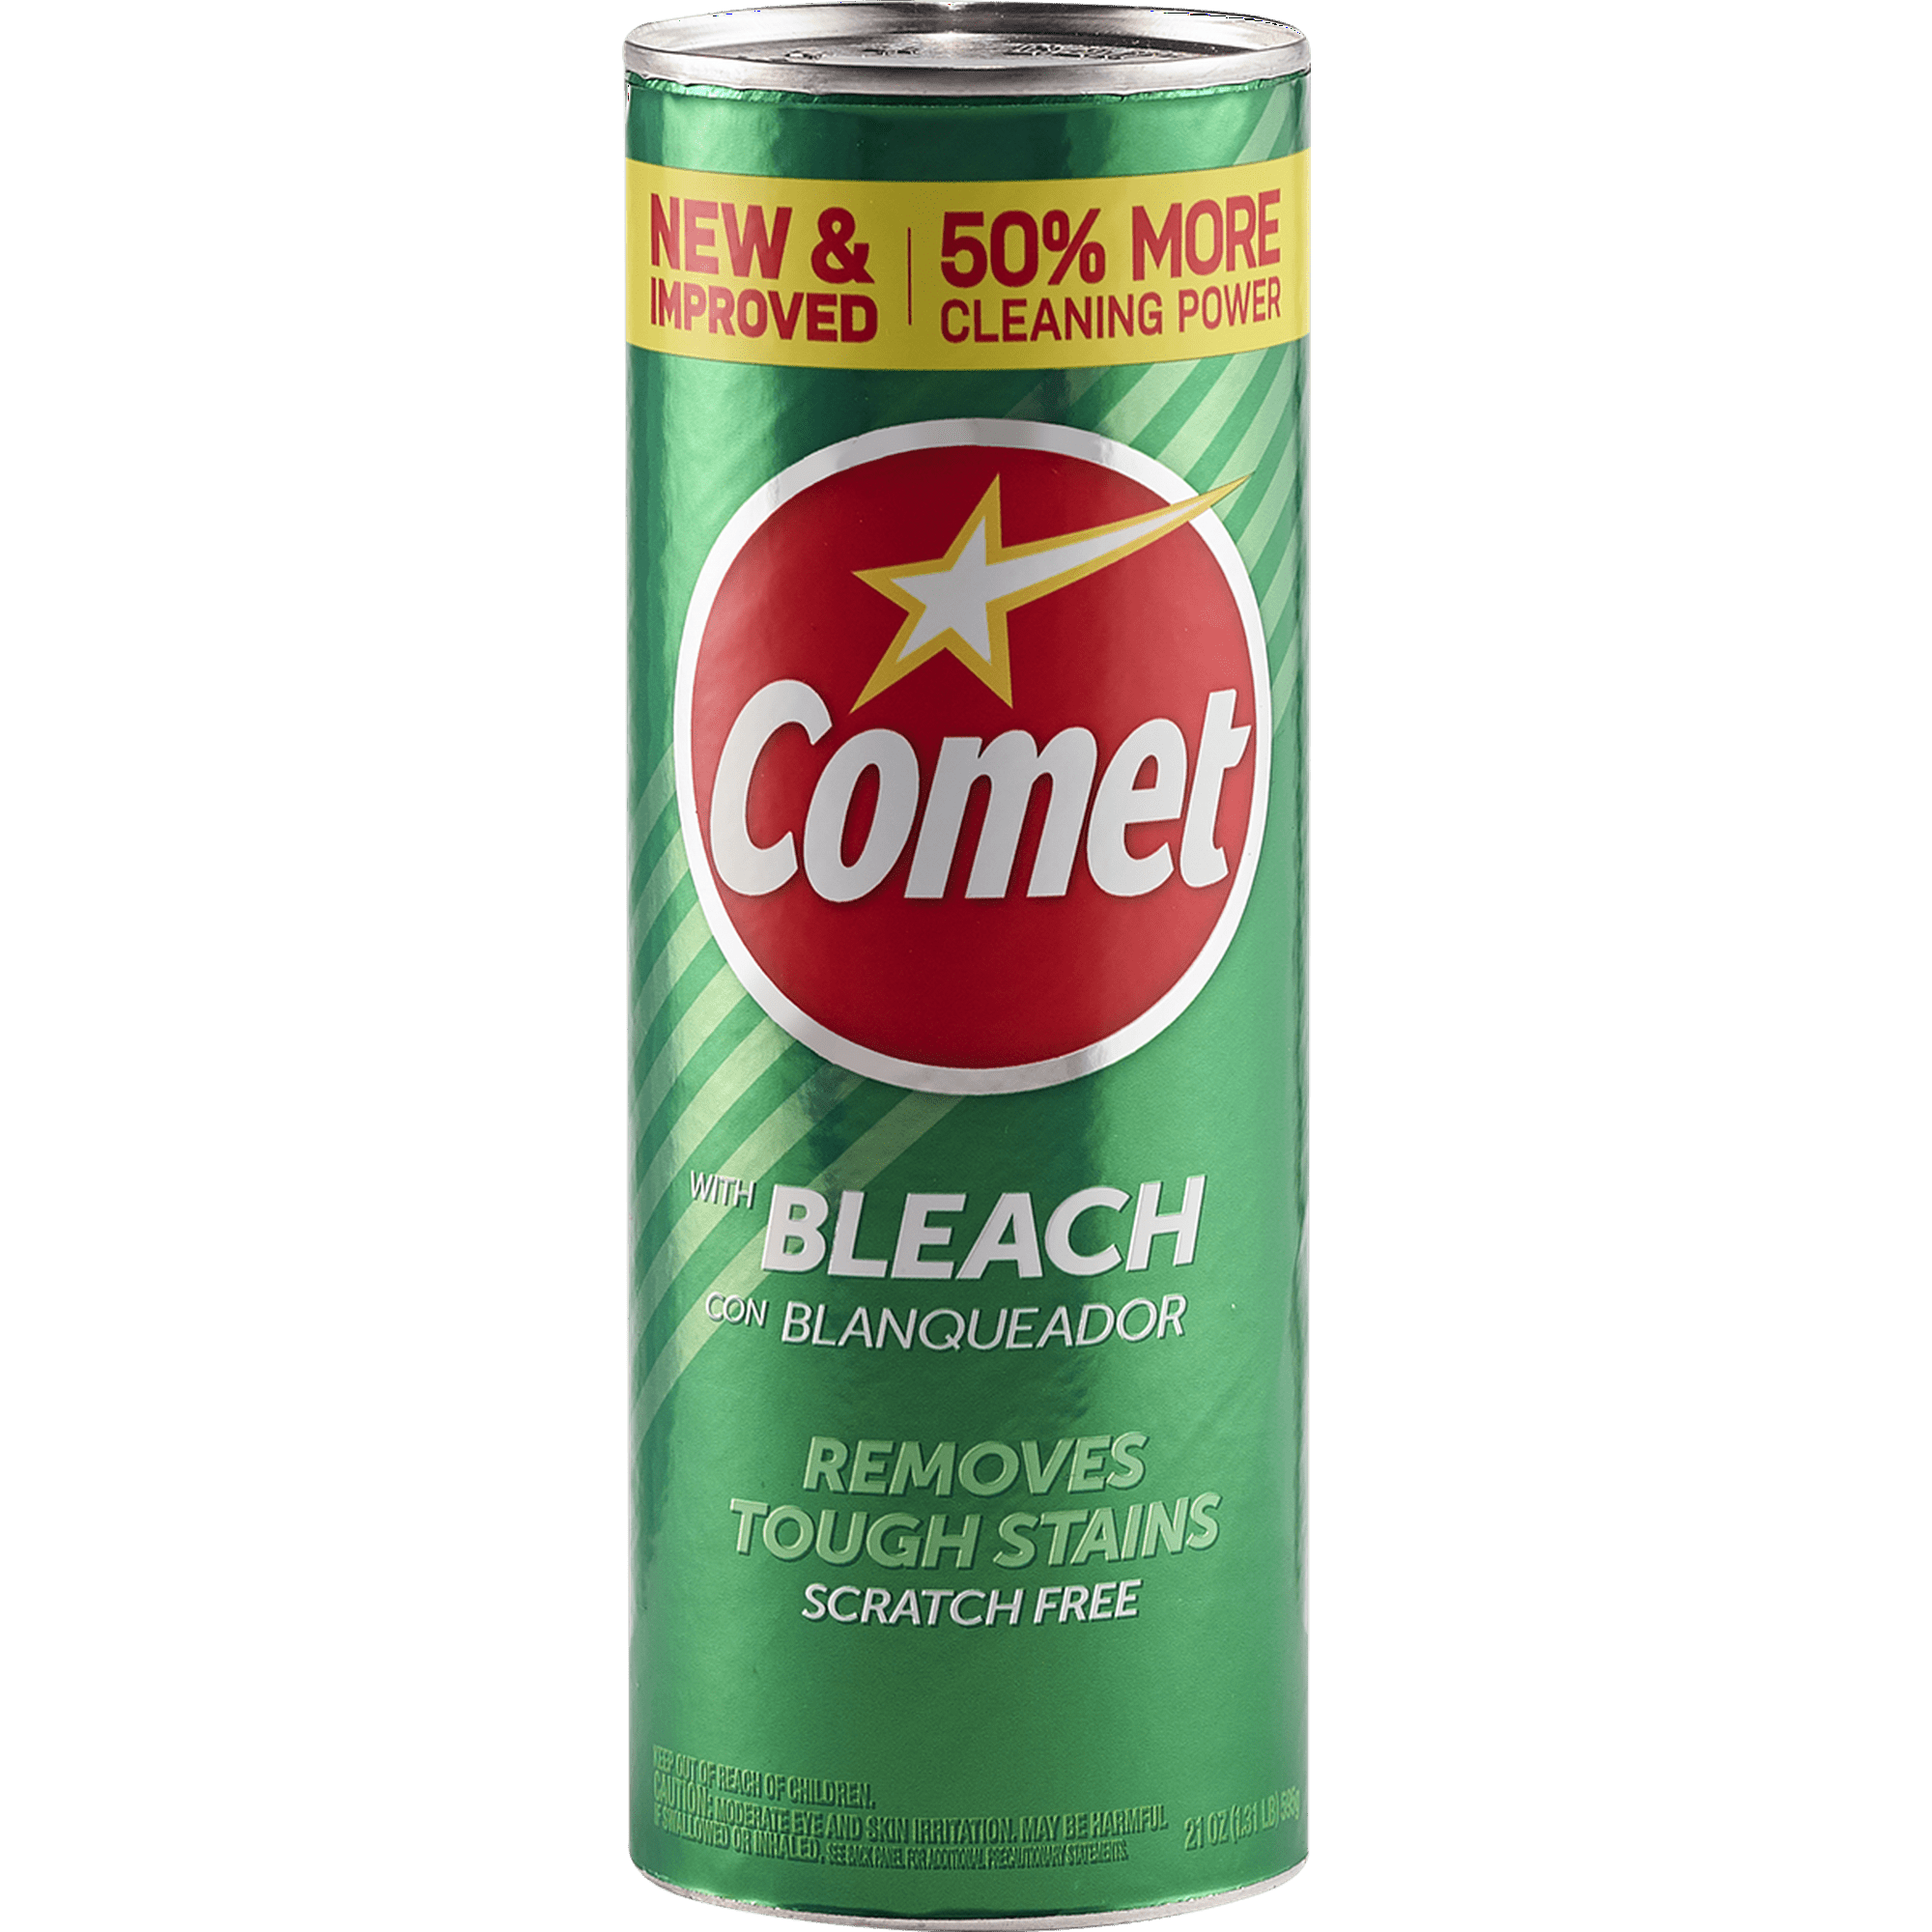 Case of 1 - Comet Cleanser With Bleach - 1.31 Lb (21 Oz)